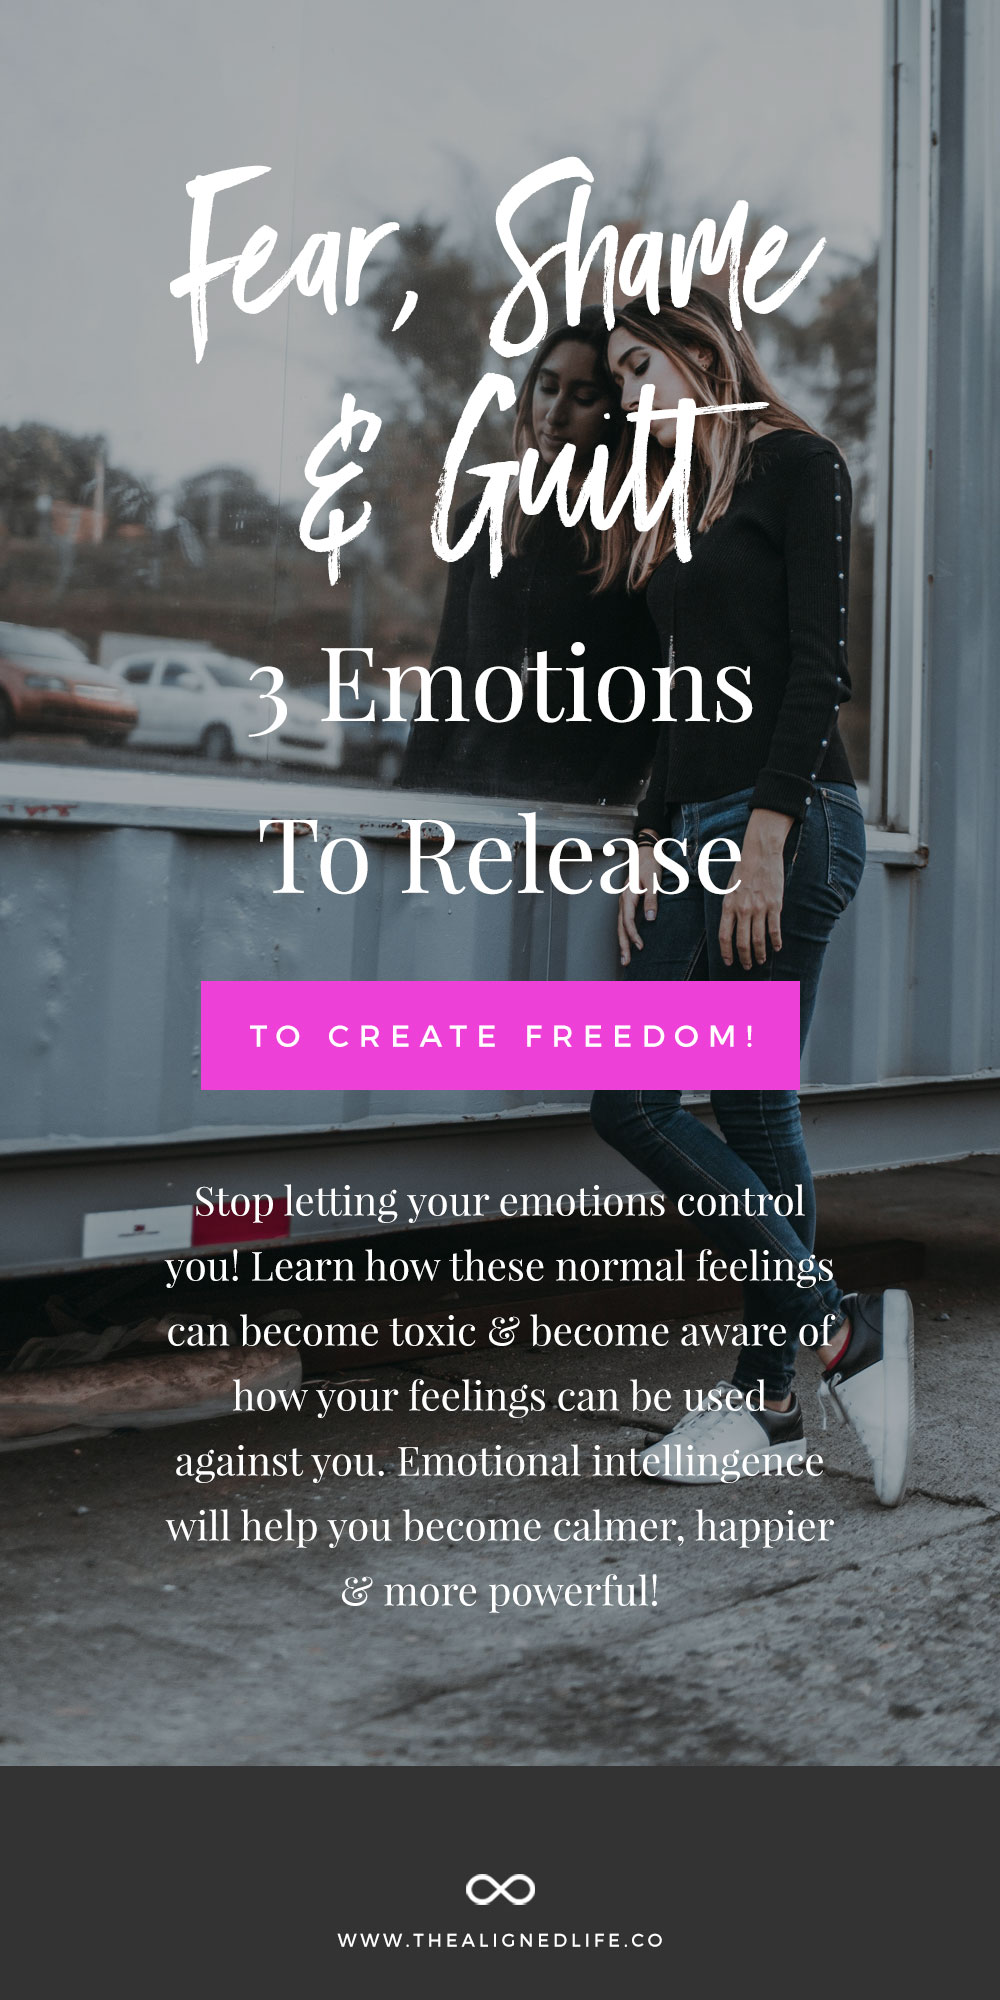 Fear, Shame And Guilt: 3 Emotions To Release To Create Freedom